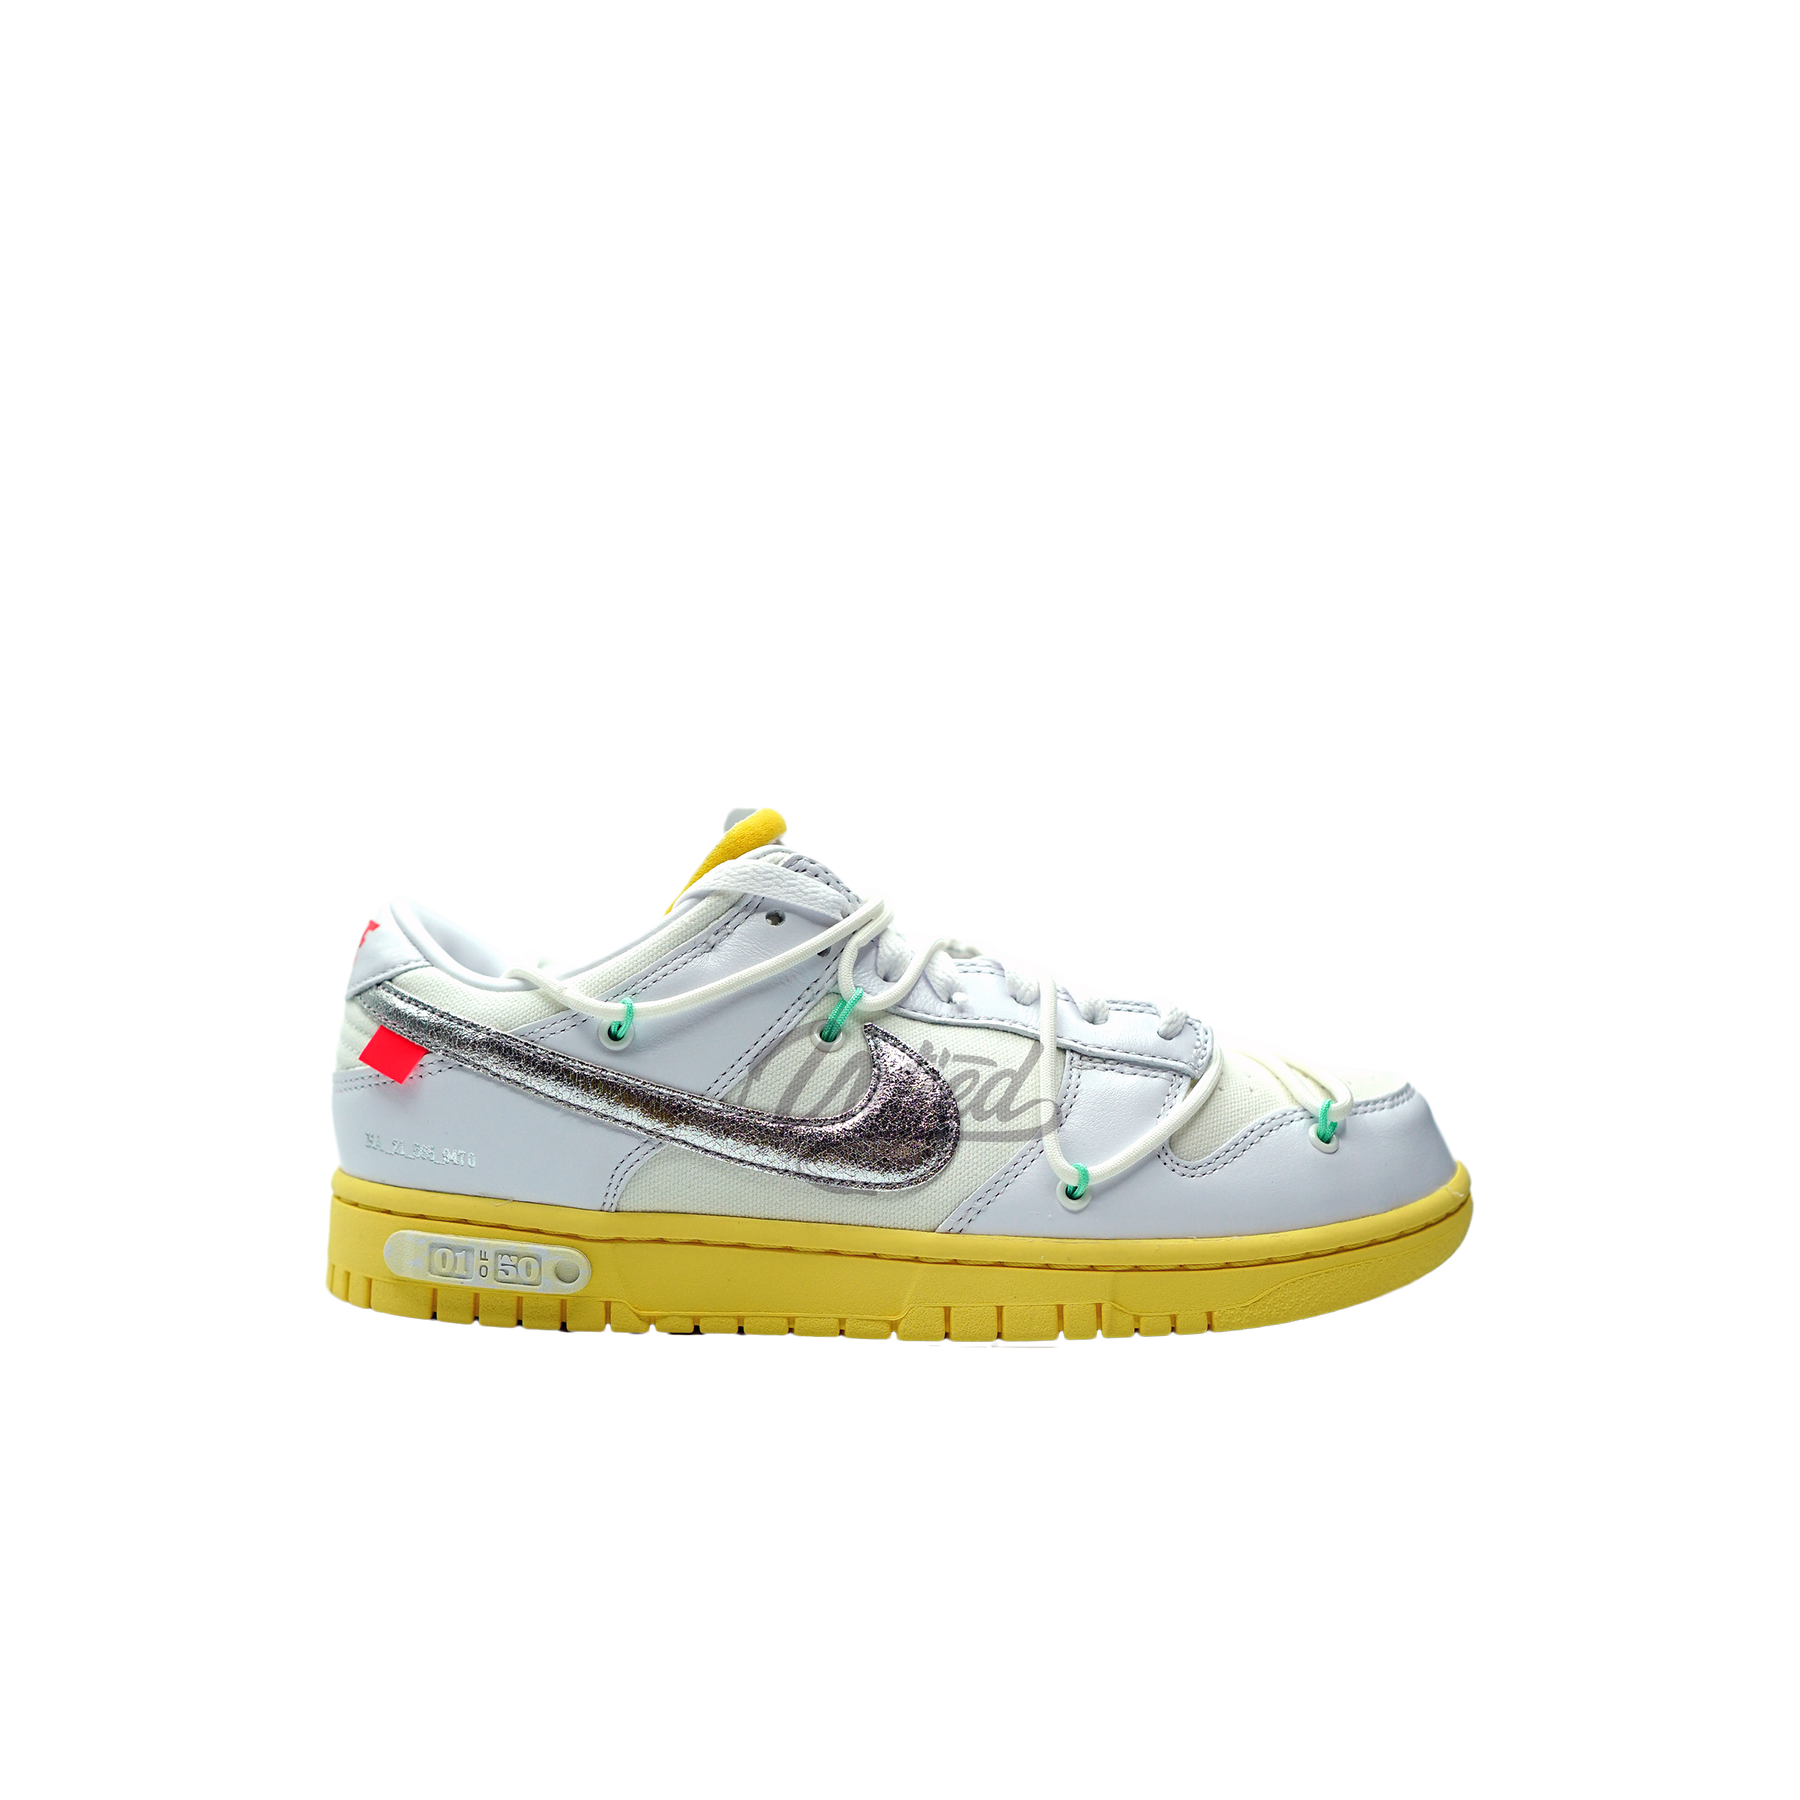 Off-White Nike Dunk Low "Lot 1"